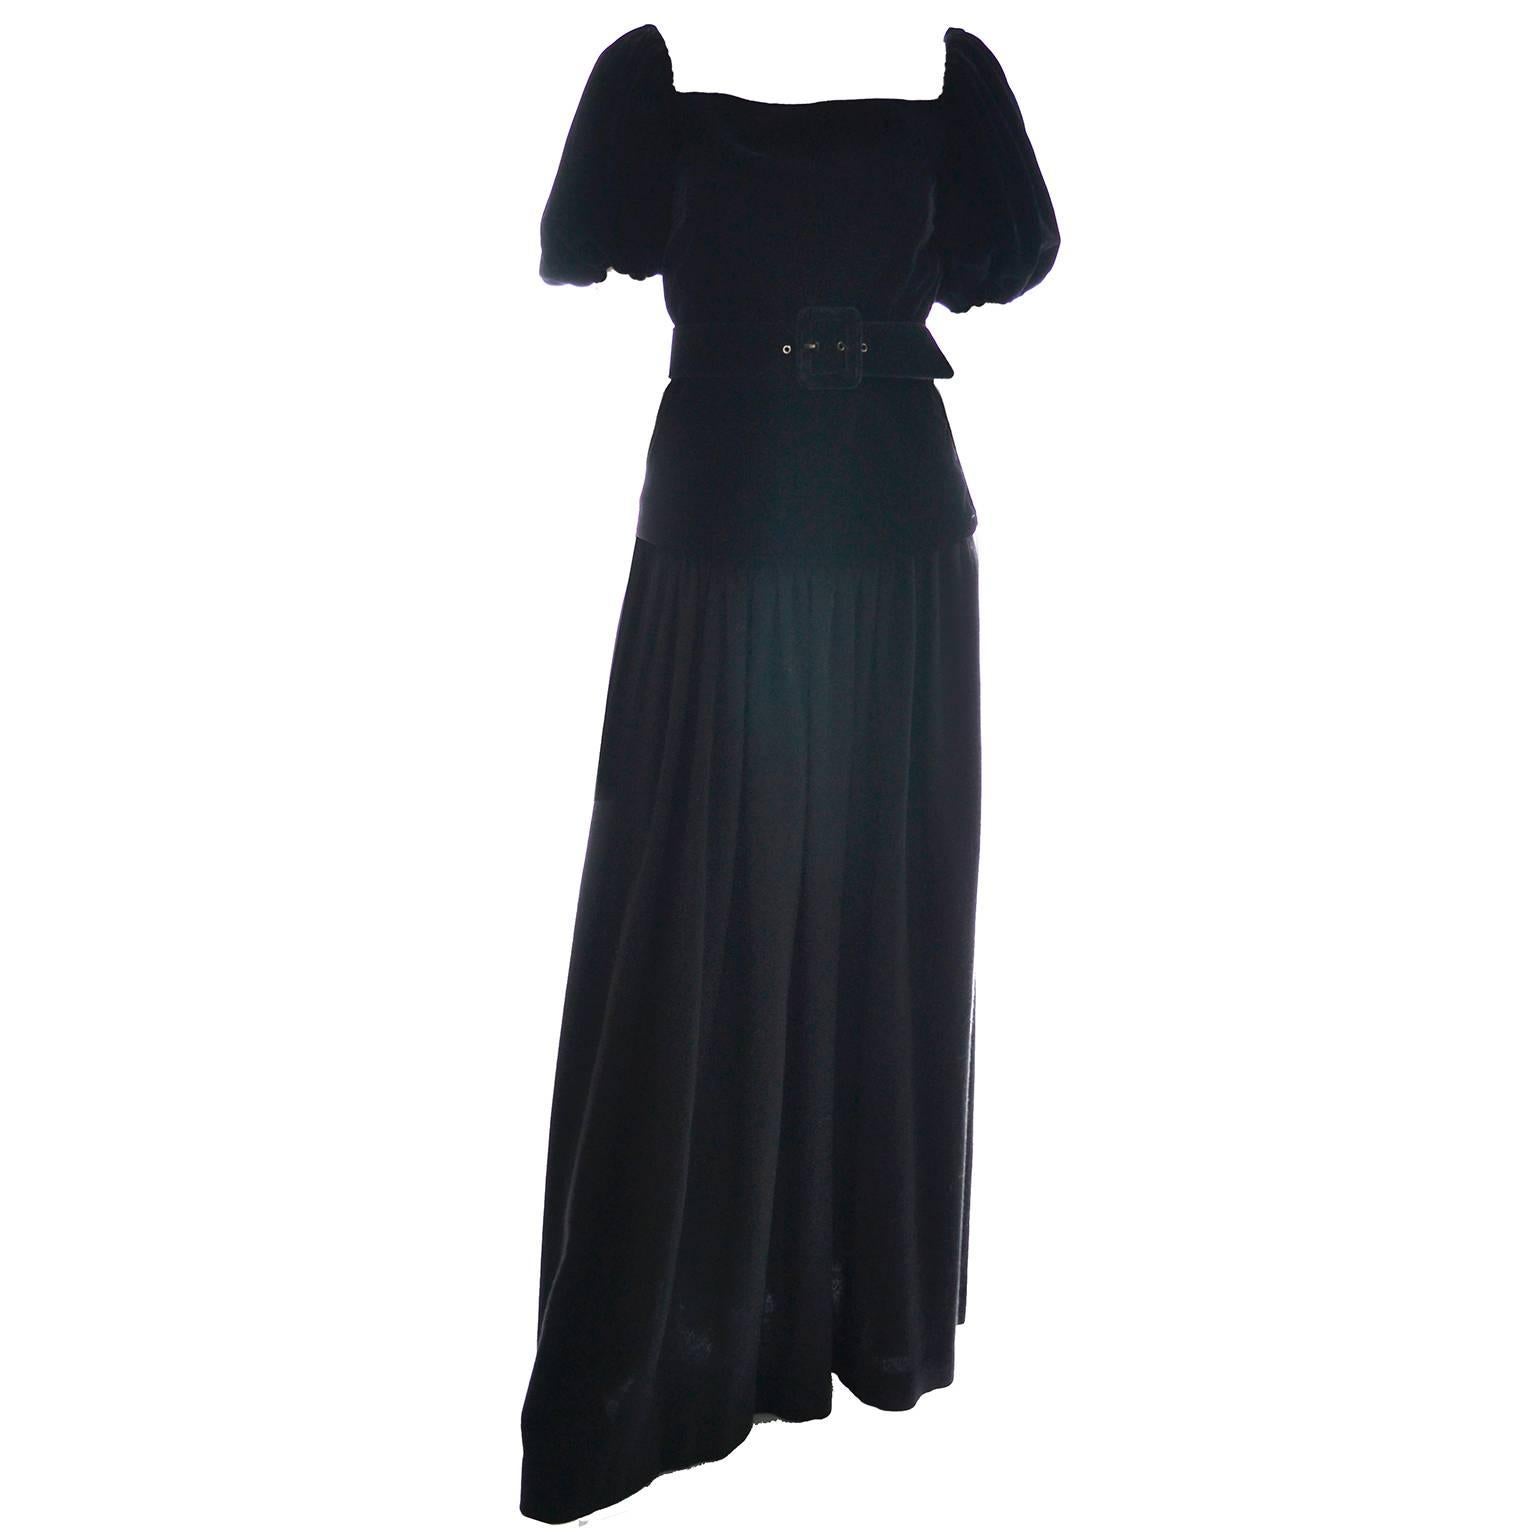 This absolutely gorgeous evening ensemble was designed by Yves Saint Laurent in the late 1970's. This two piece vintage dress includes a luxurious black velvet top with puff short sleeves that could be worn on or off shoulders and either tucked in